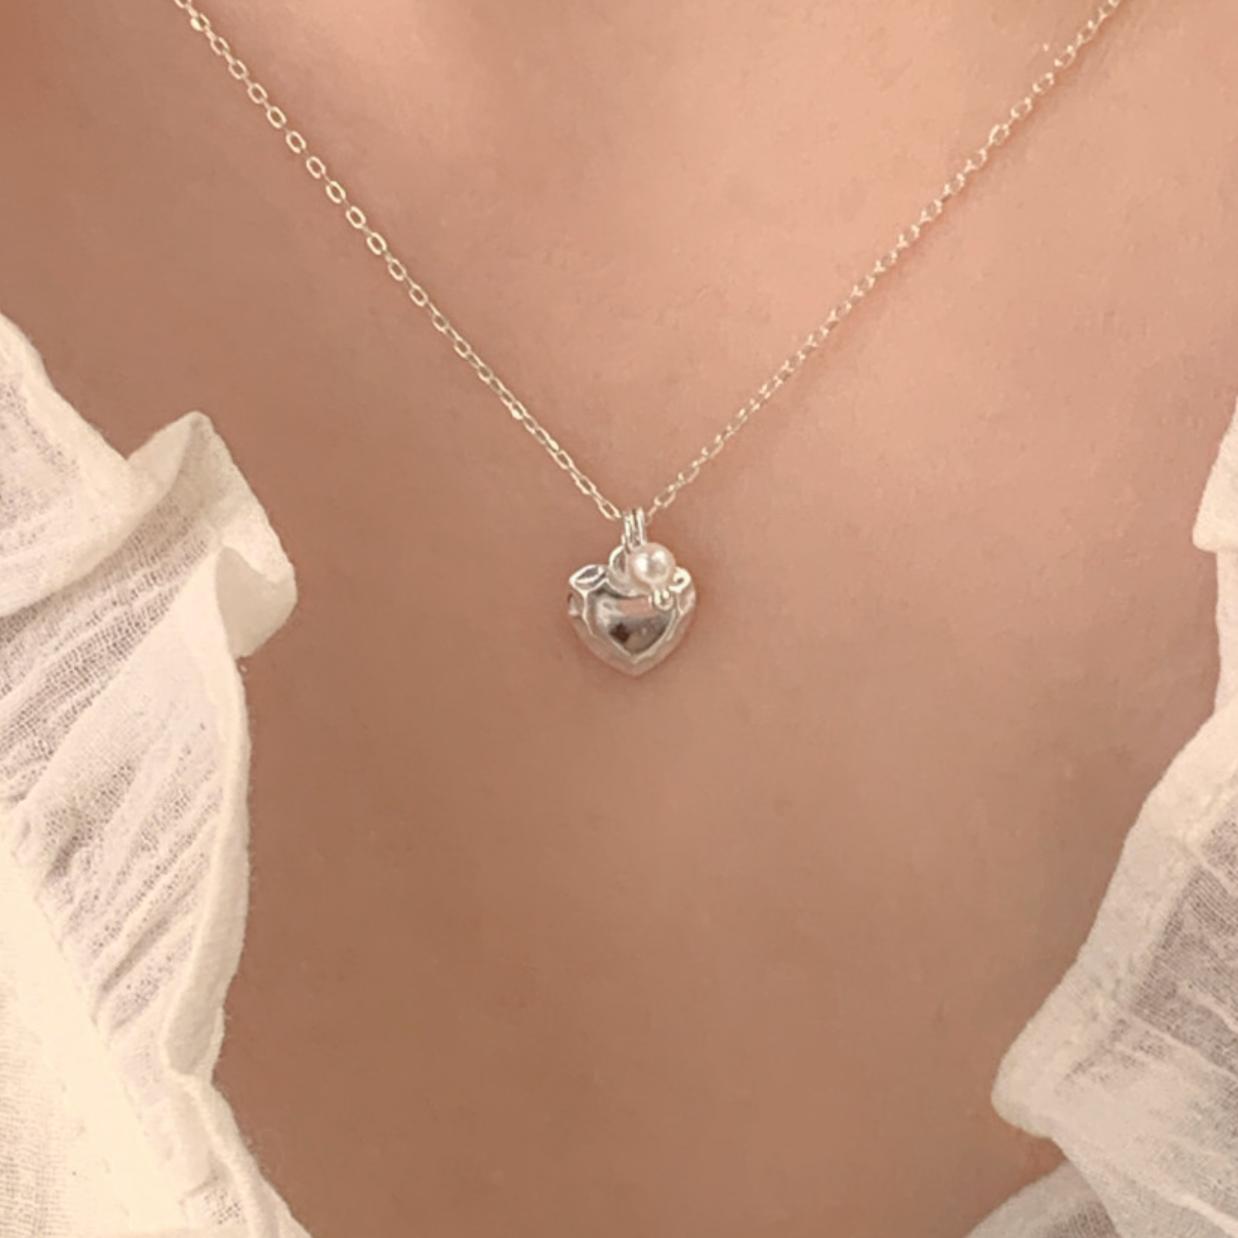 [aube n berry] 925 Silver Vintage Heart Pearl Silver Necklace